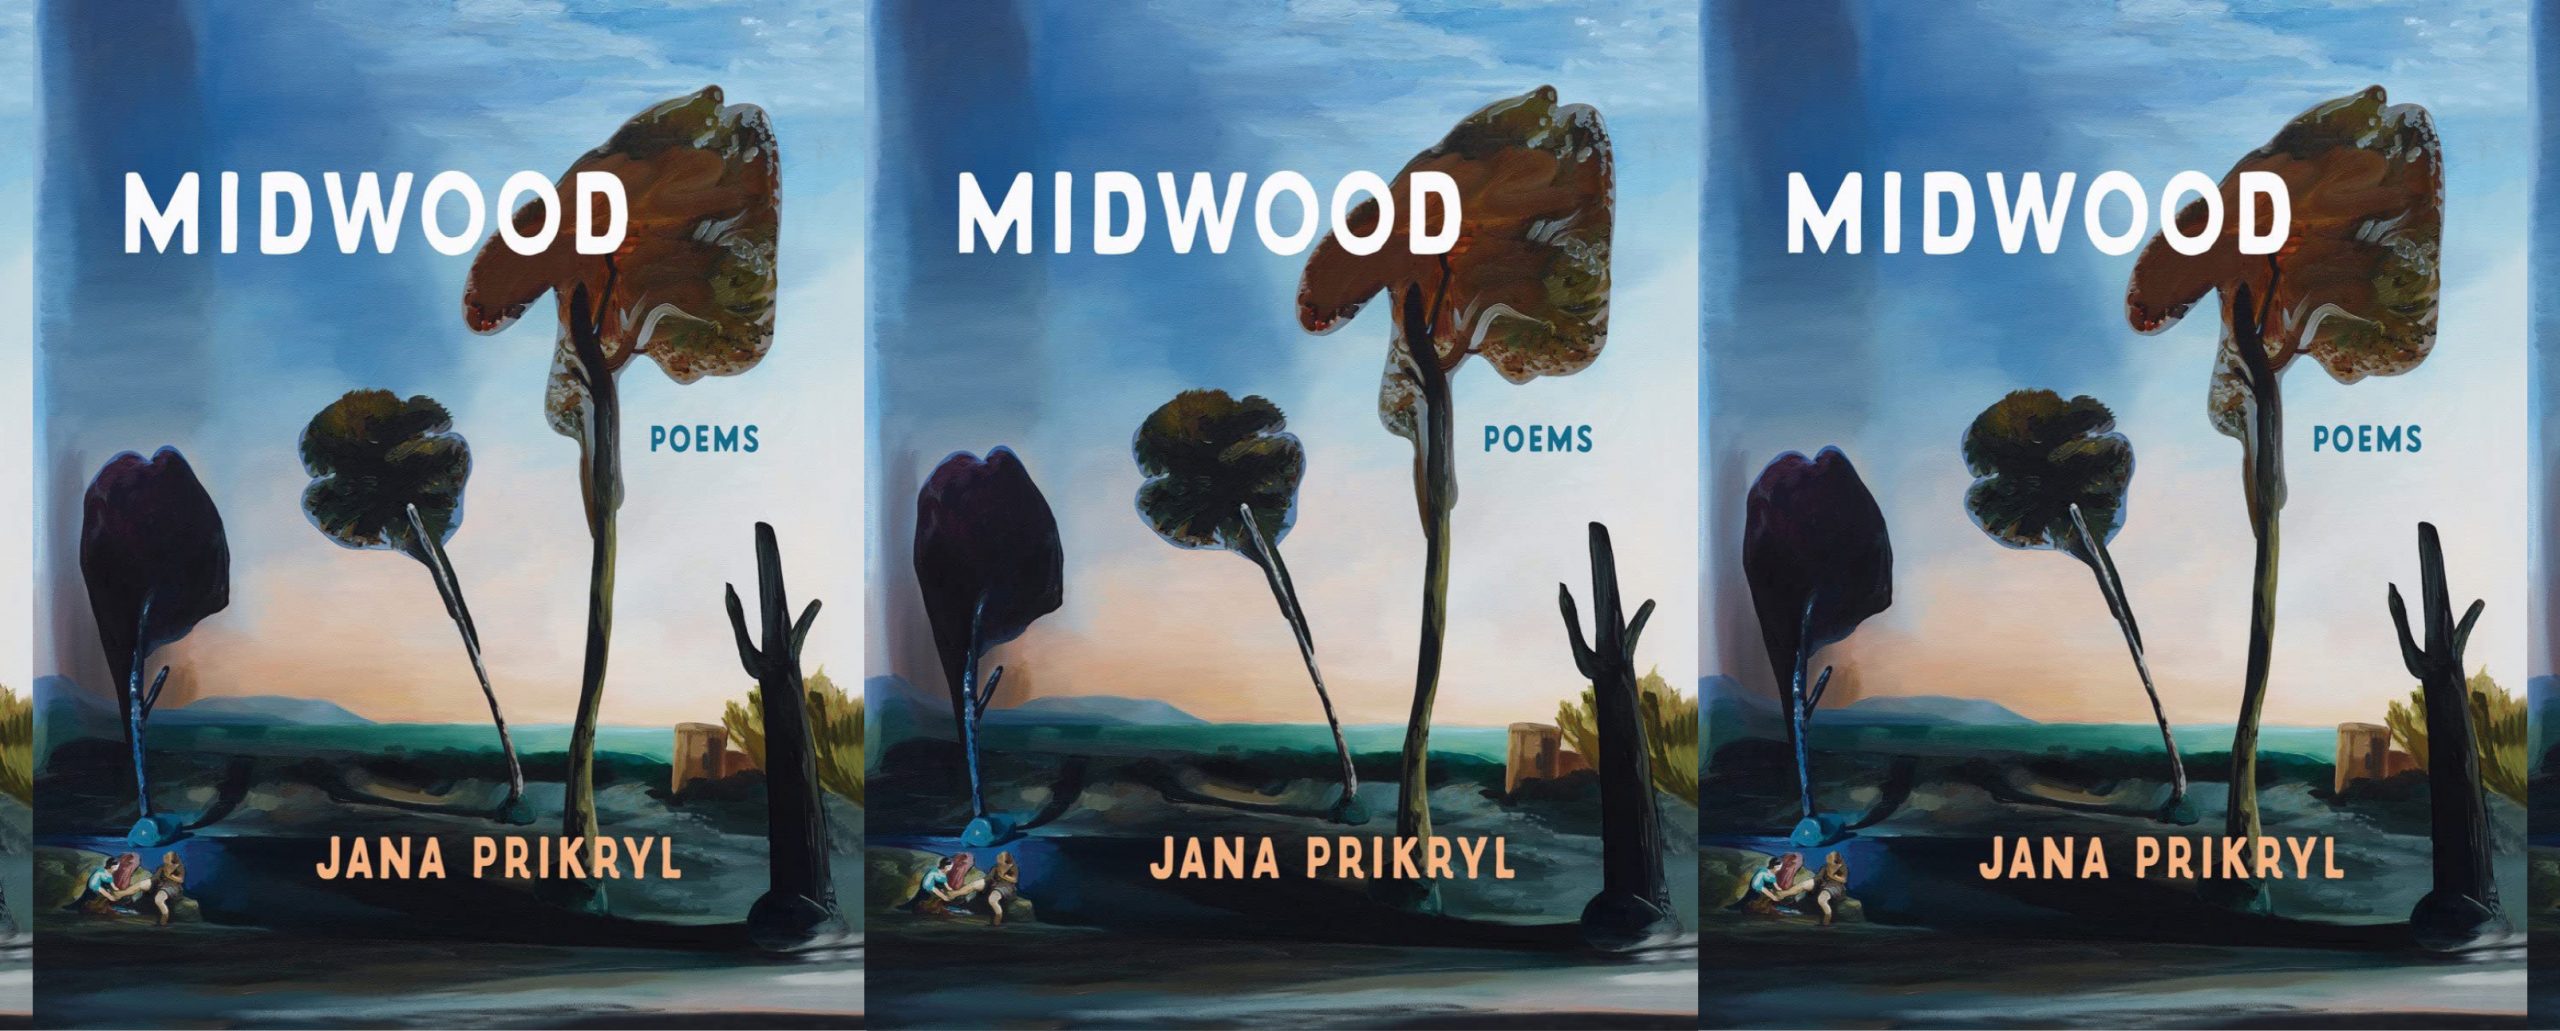 the book cover for Midwood, featuring a painting of two people sitting under very tall trees